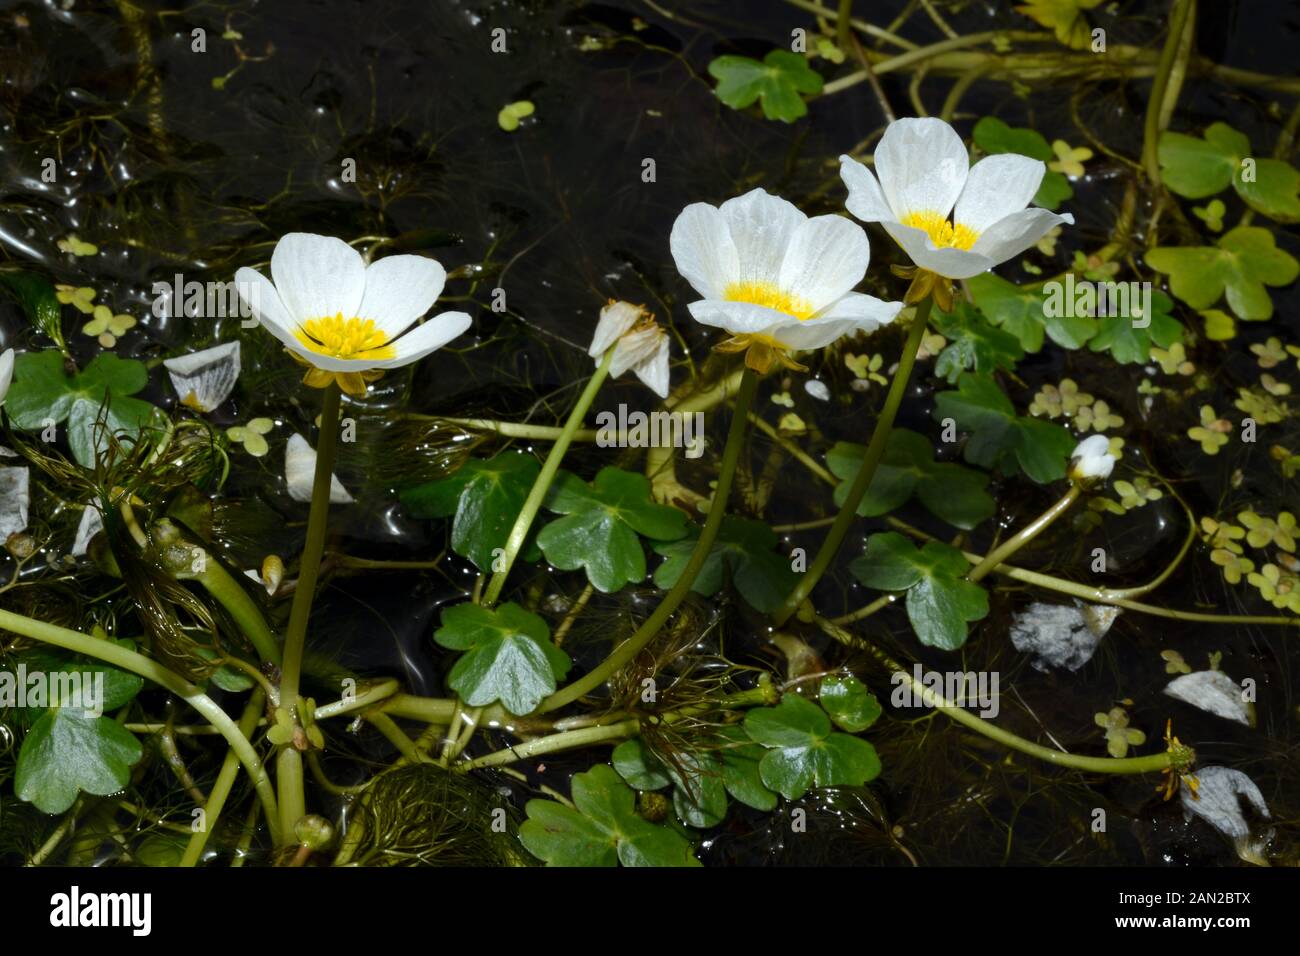 Ranunculus tripartitus (three-lobed water-crowfoot) is native to Europe growing in wet mud, ditches and ponds. Stock Photo